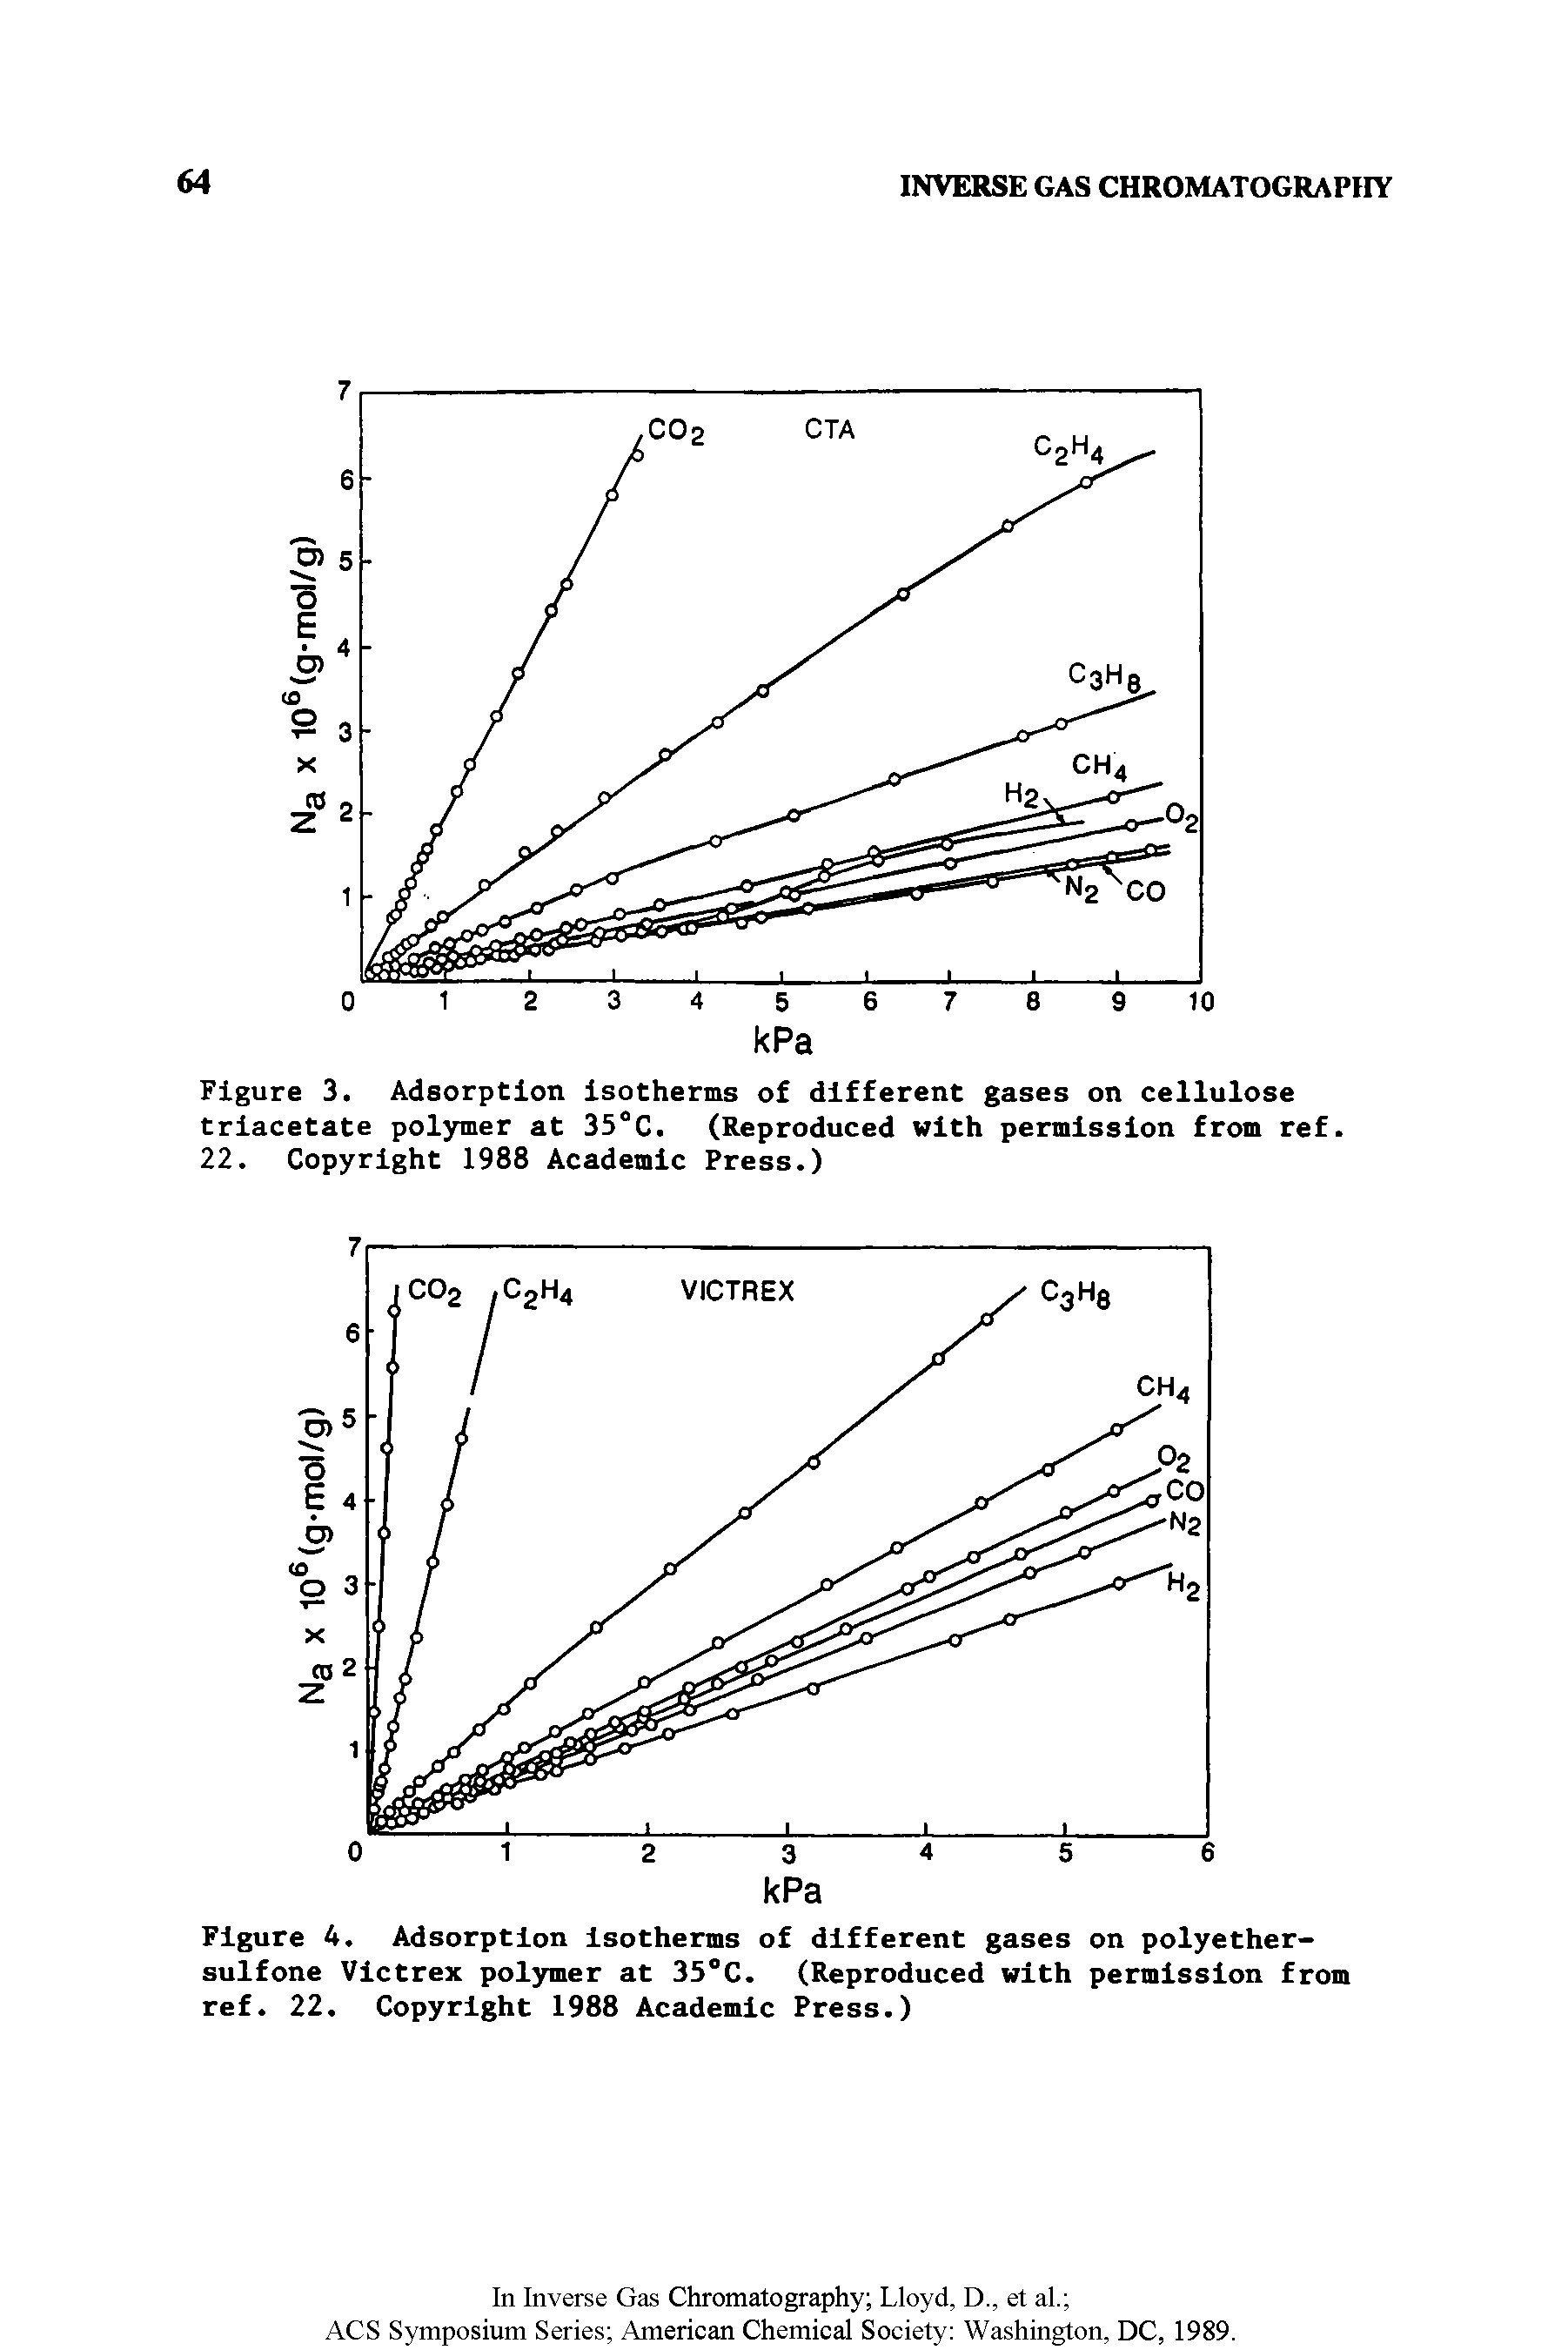 Figure 4. Adsorption isotherms of different gases on polyether-sulfone Victrex polymer at 35°C. (Reproduced with permission from ref. 22. Copyright 1988 Academic Press.)...